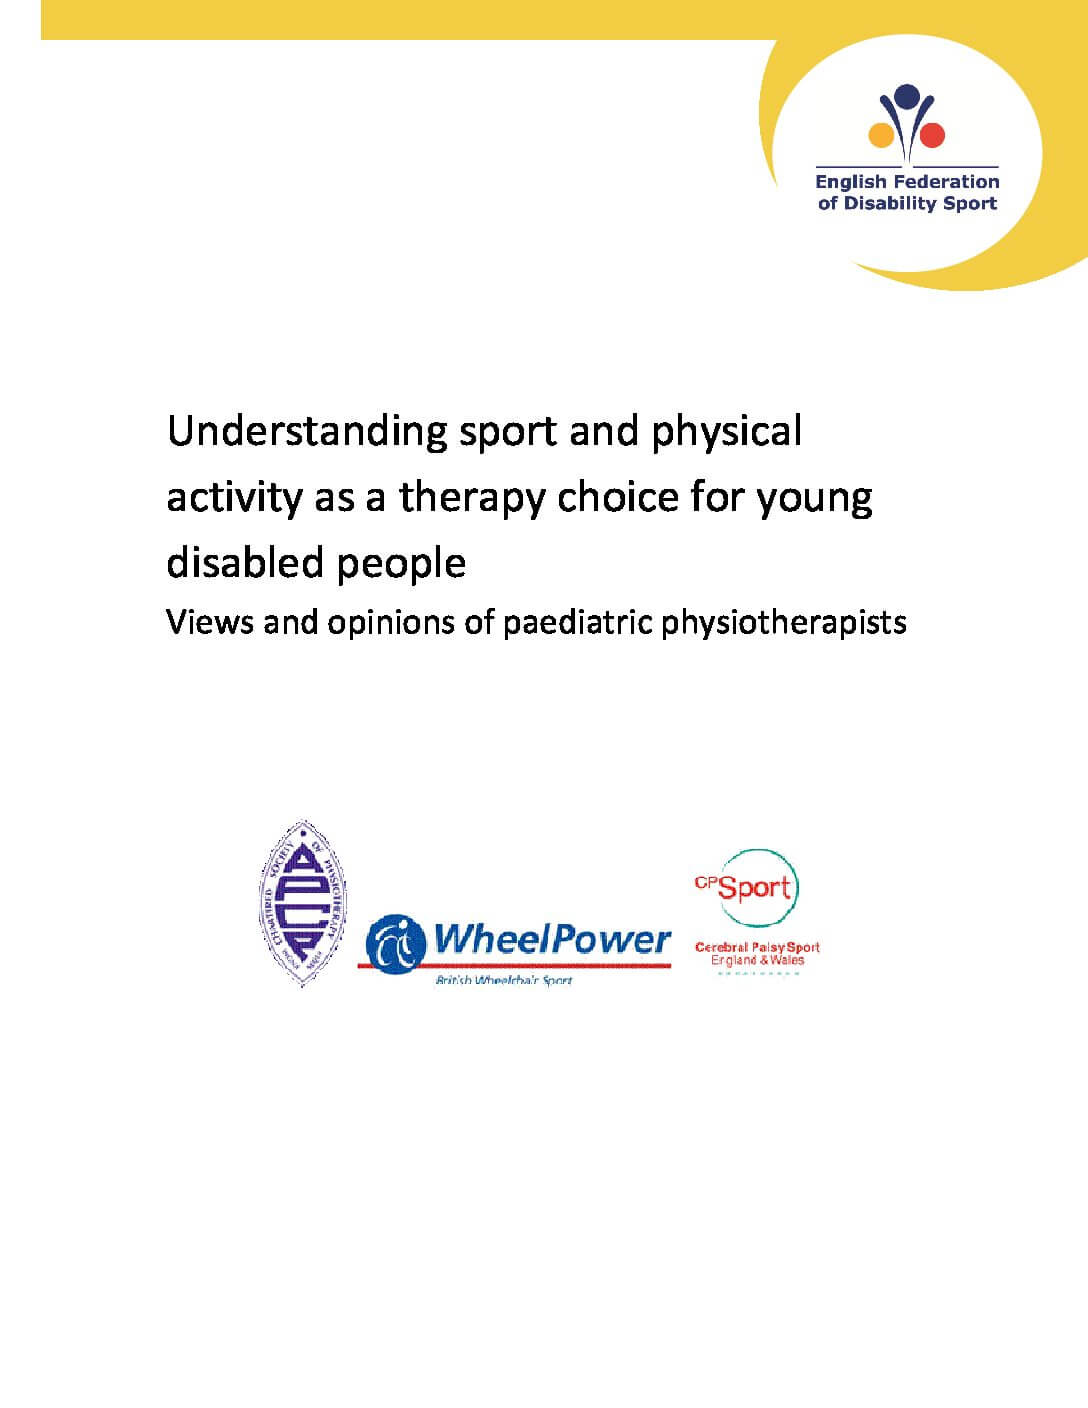 Understanding sport and physical activity as a therapy choice for young disabled people